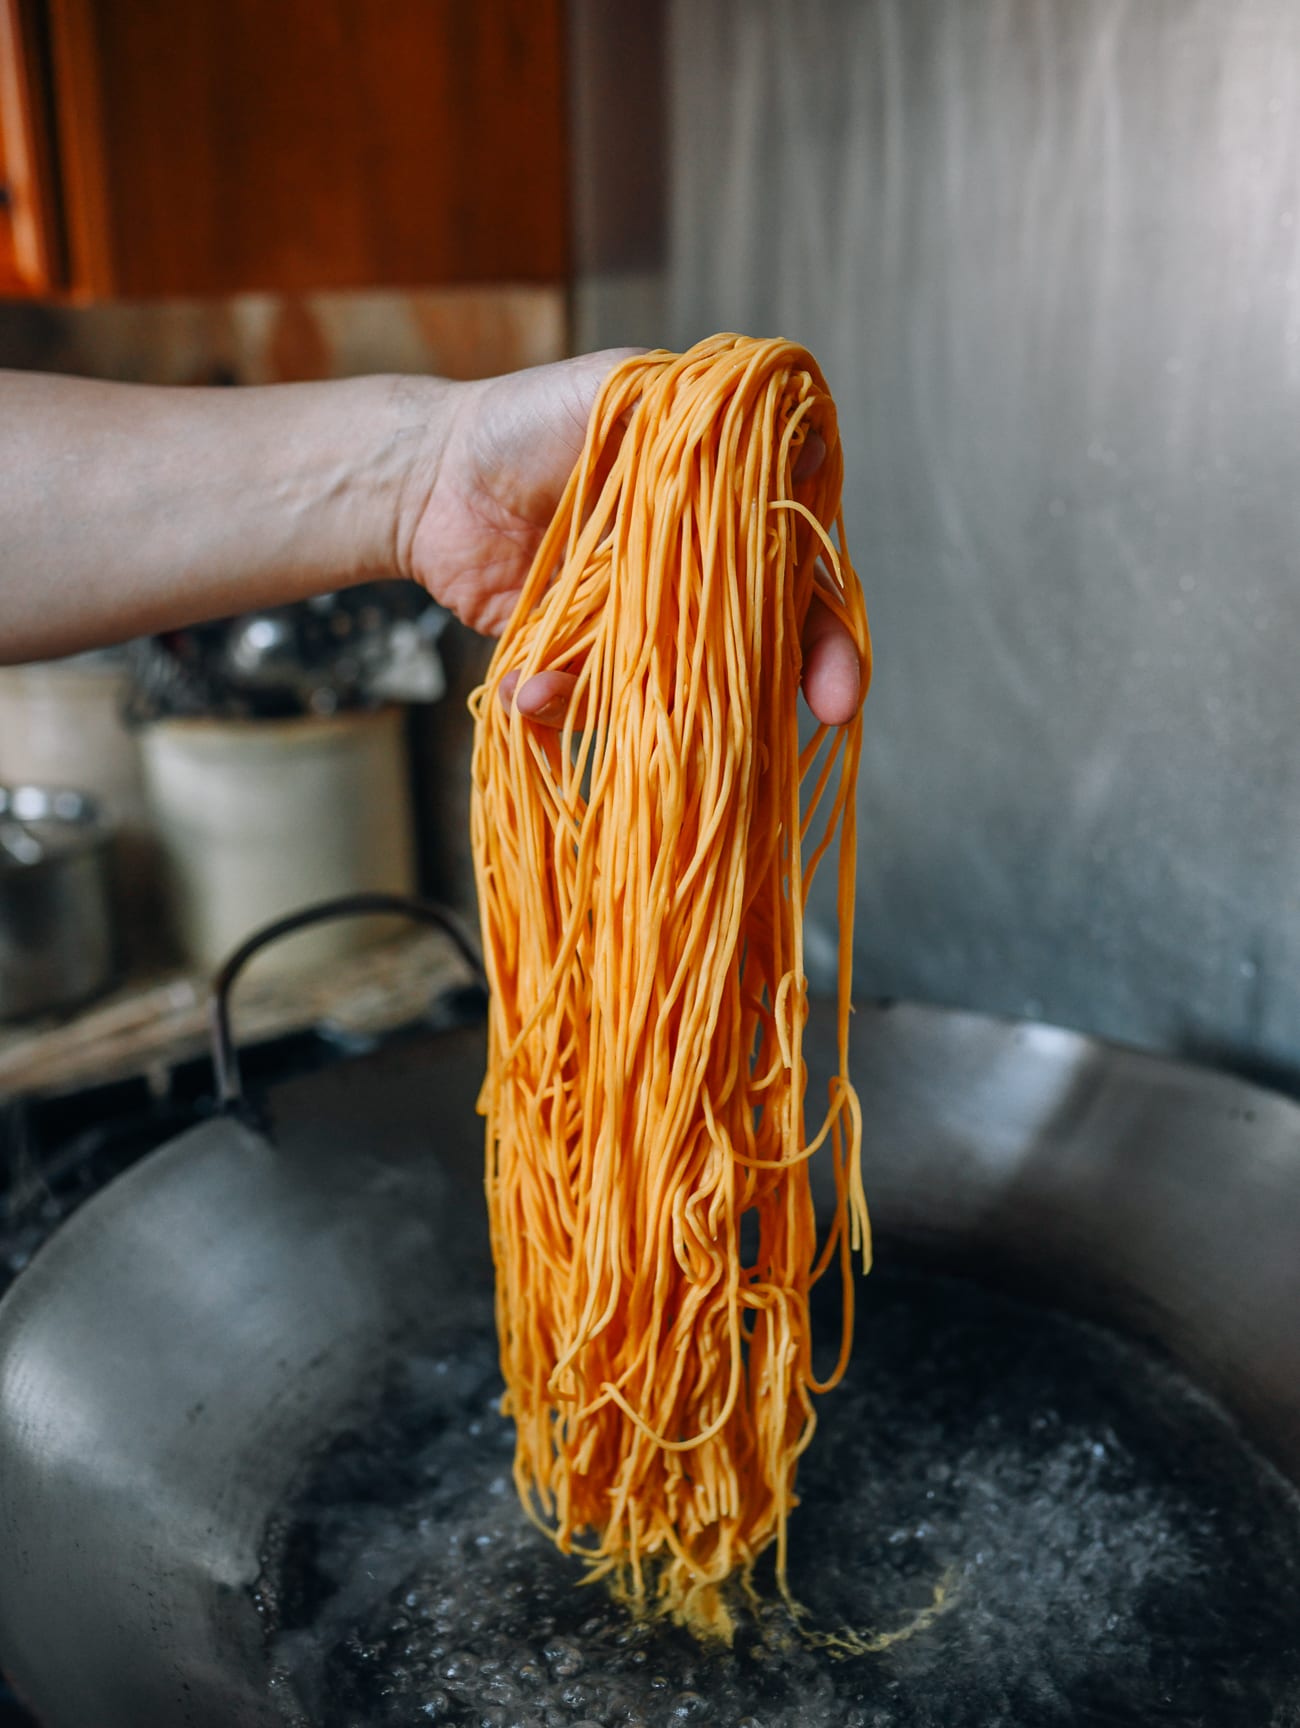 How to Cook Lo Mein Noodles